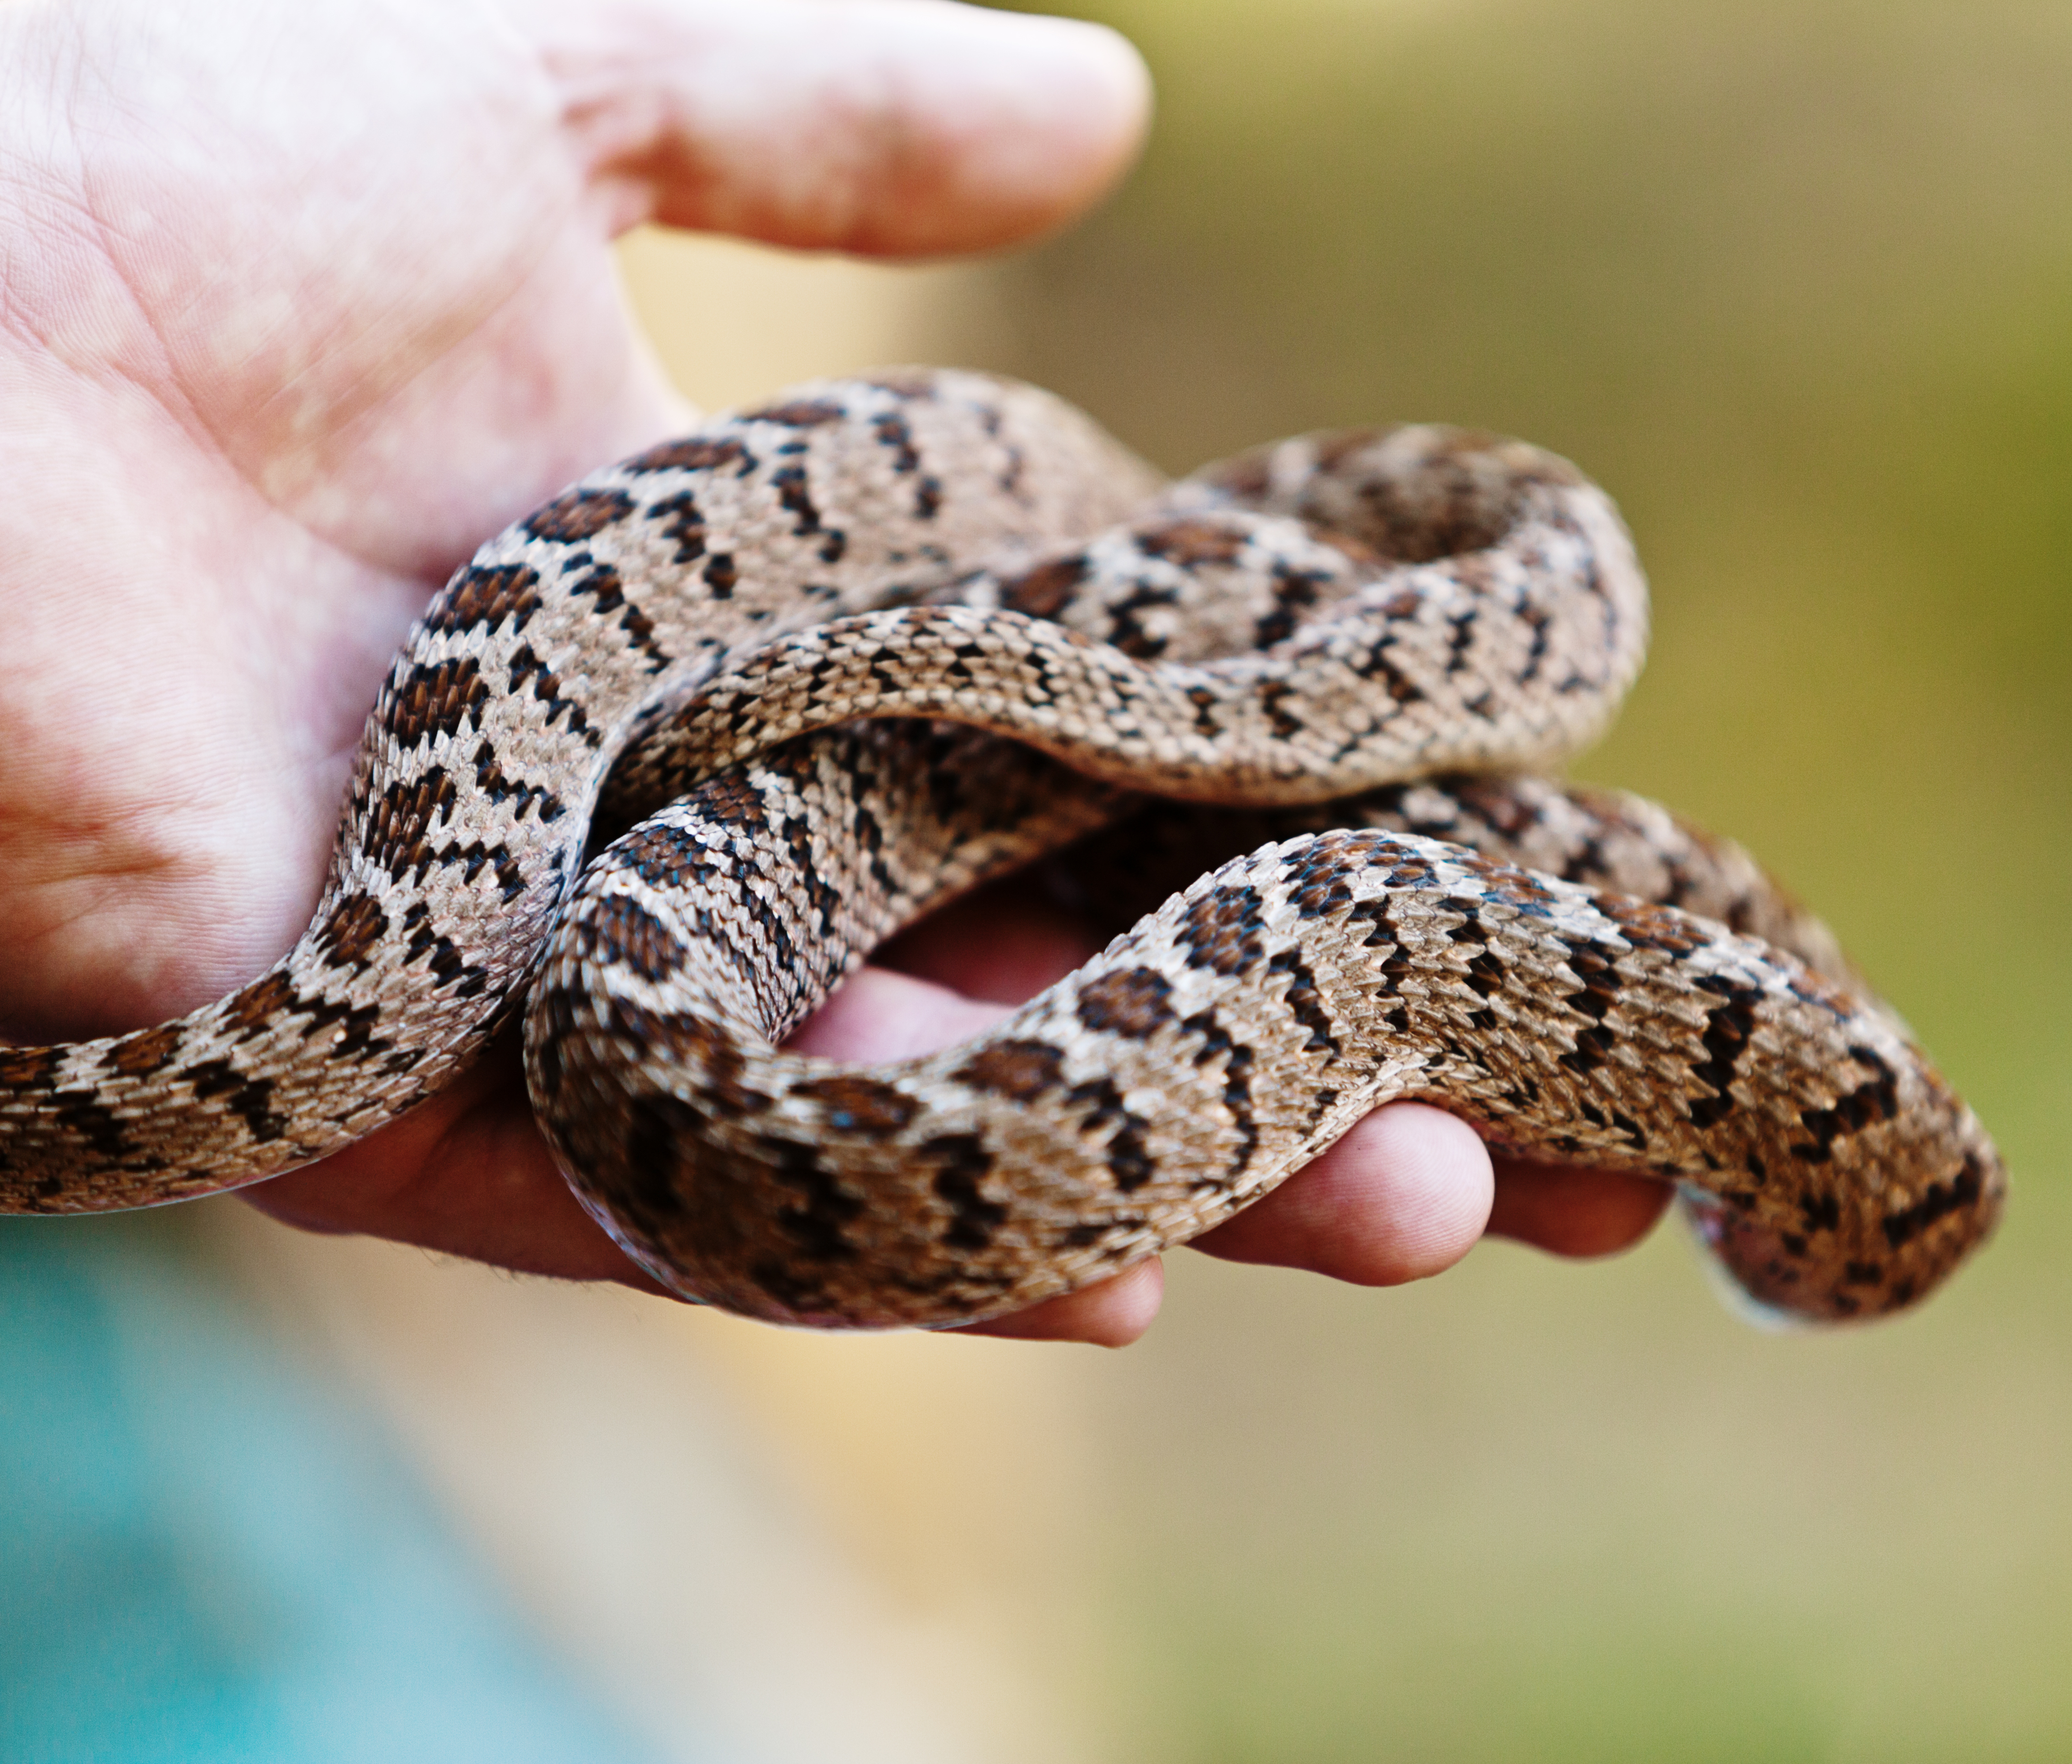 Salmonella outbreak linked to snakes, rodents has infected 70 in Canada